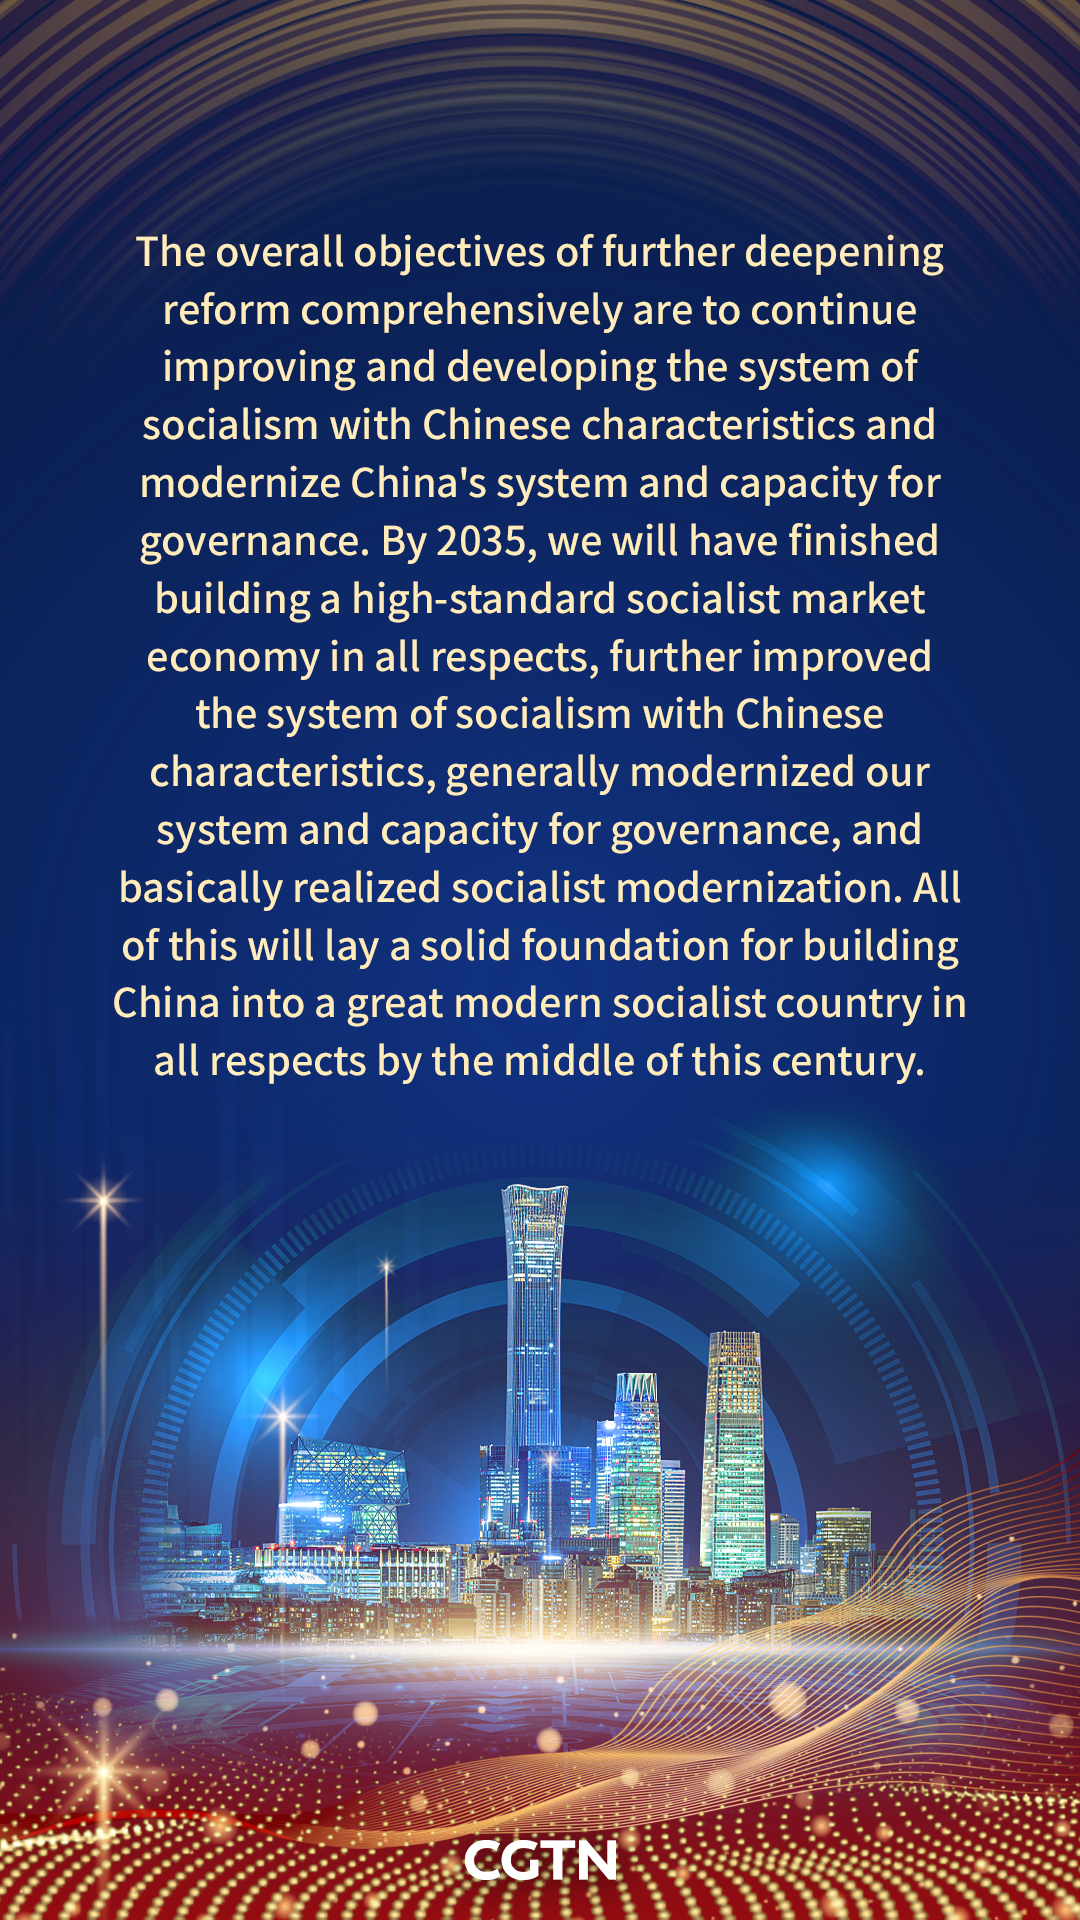 Excerpts from the 20th CPC Central Committee's 3rd plenum communique